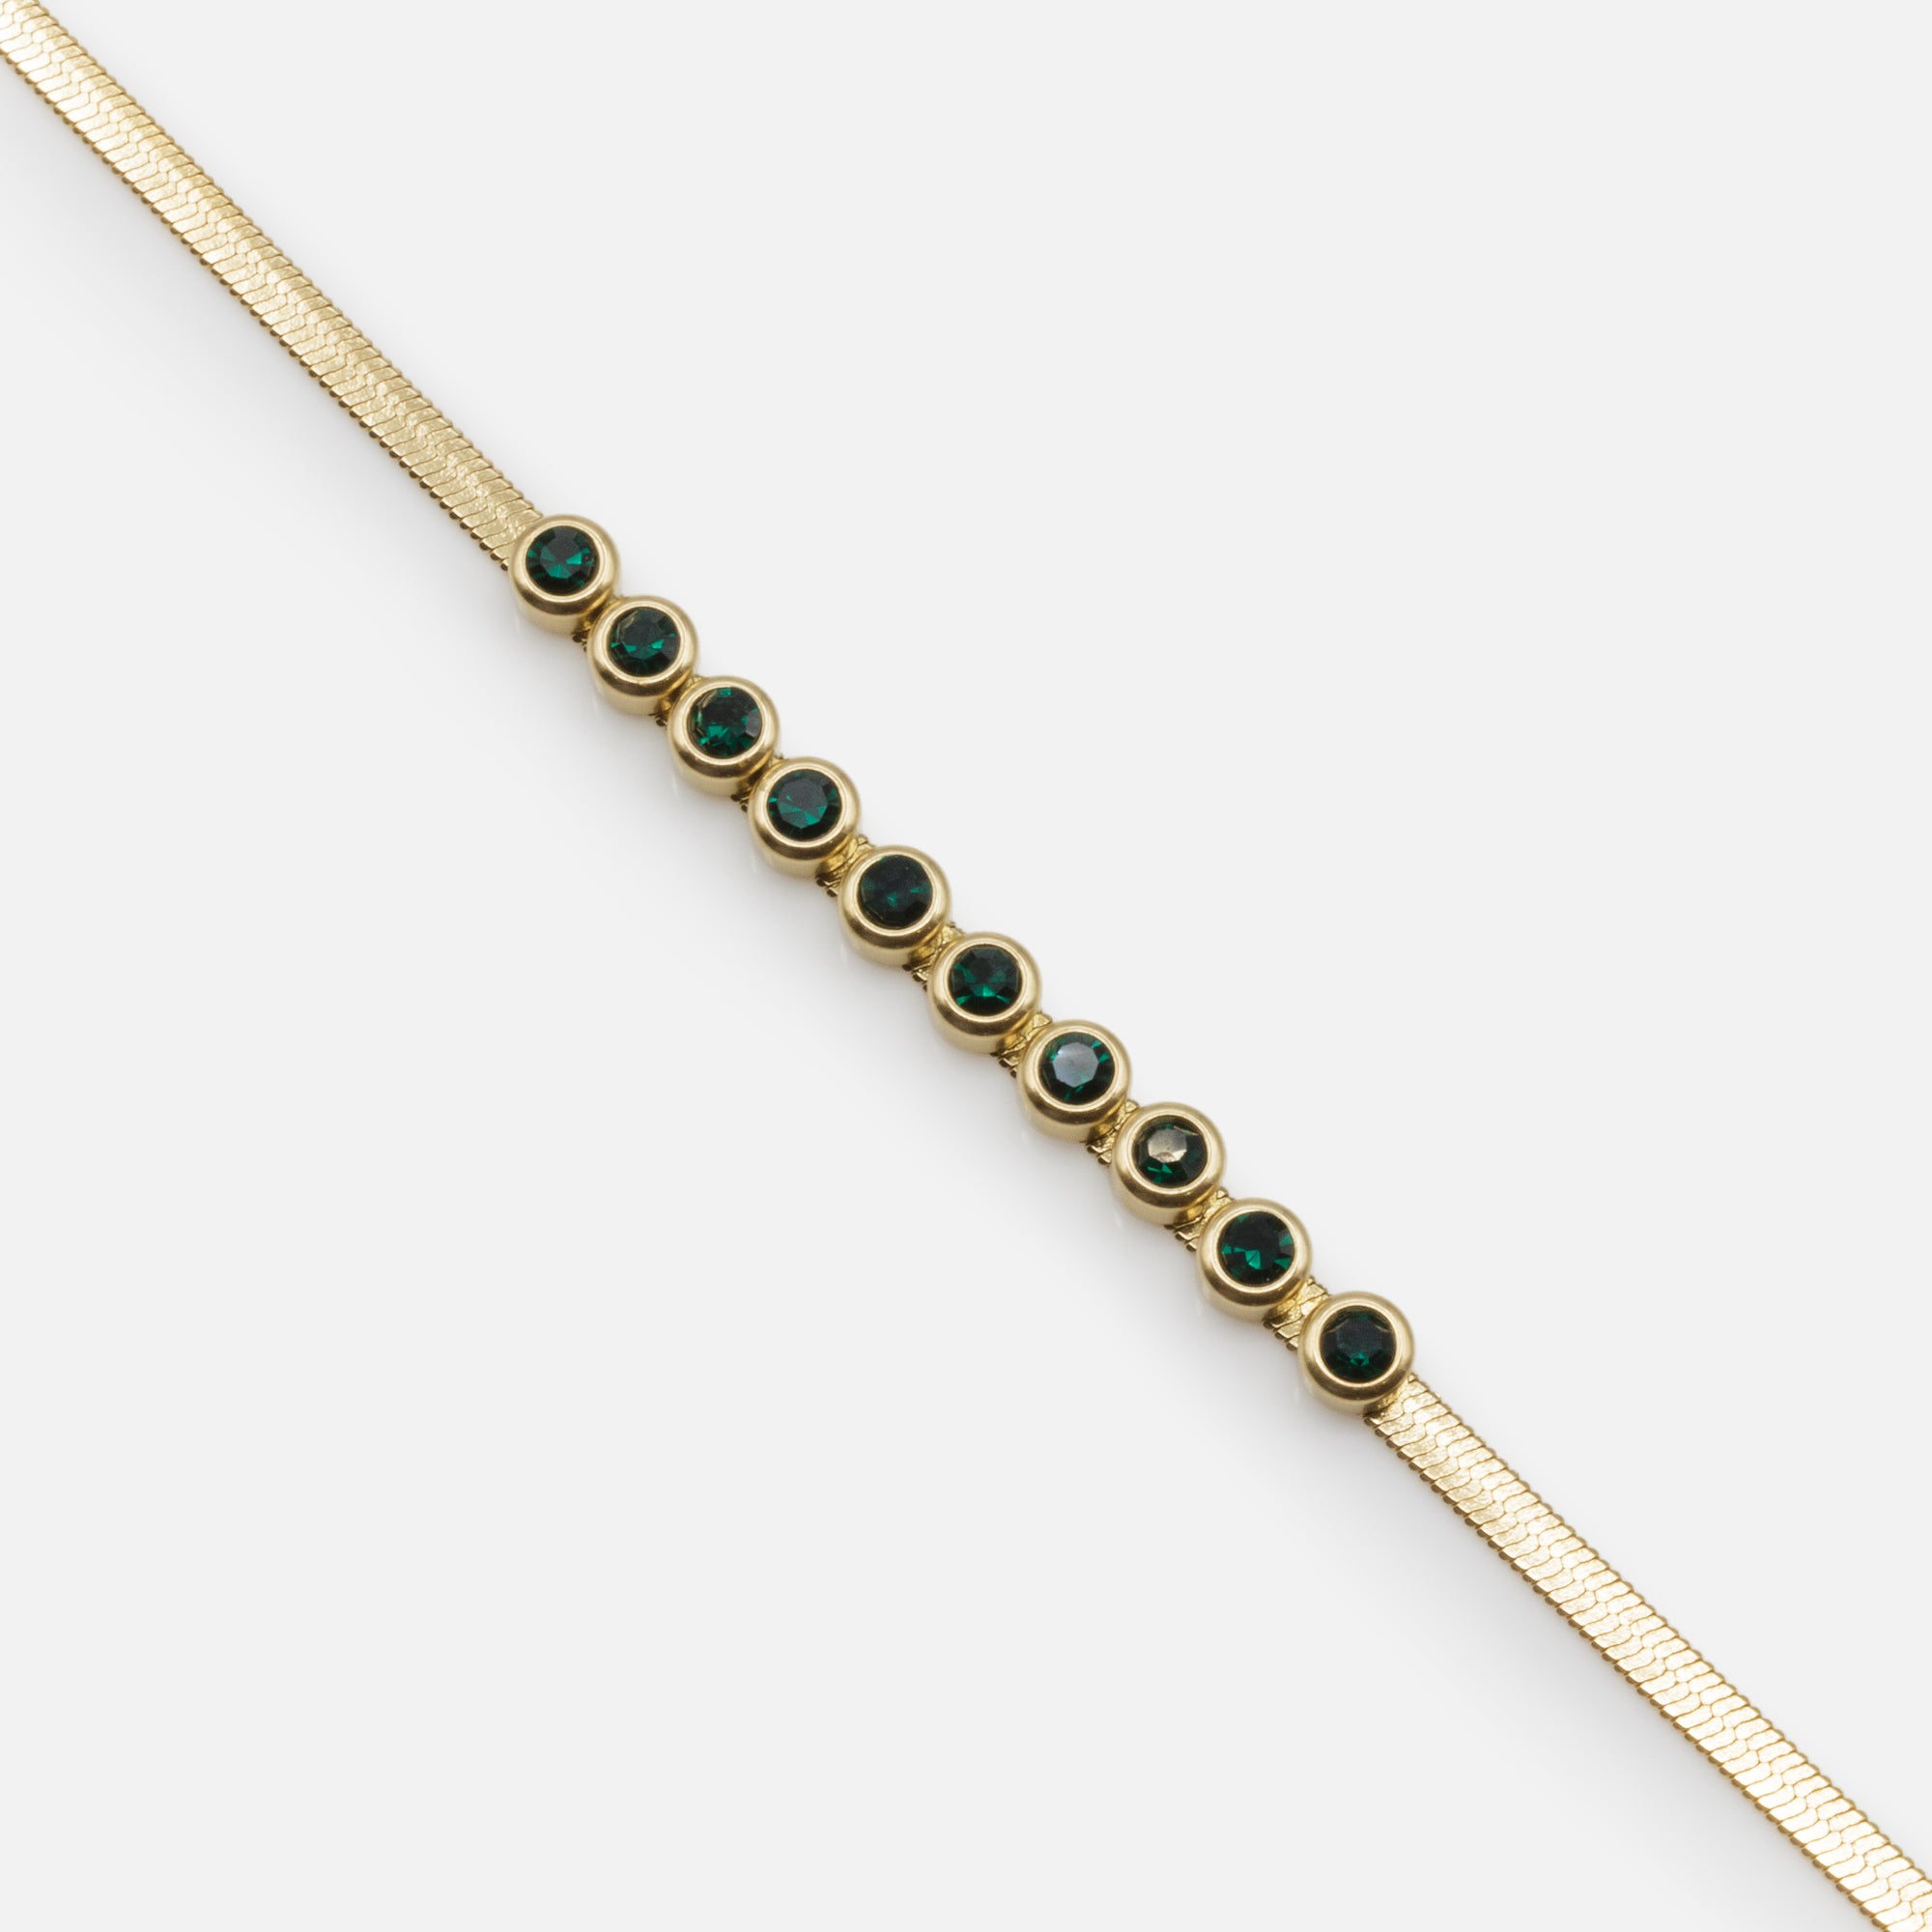 Gold curb chain and bracelet set with emerald stones in stainless steel